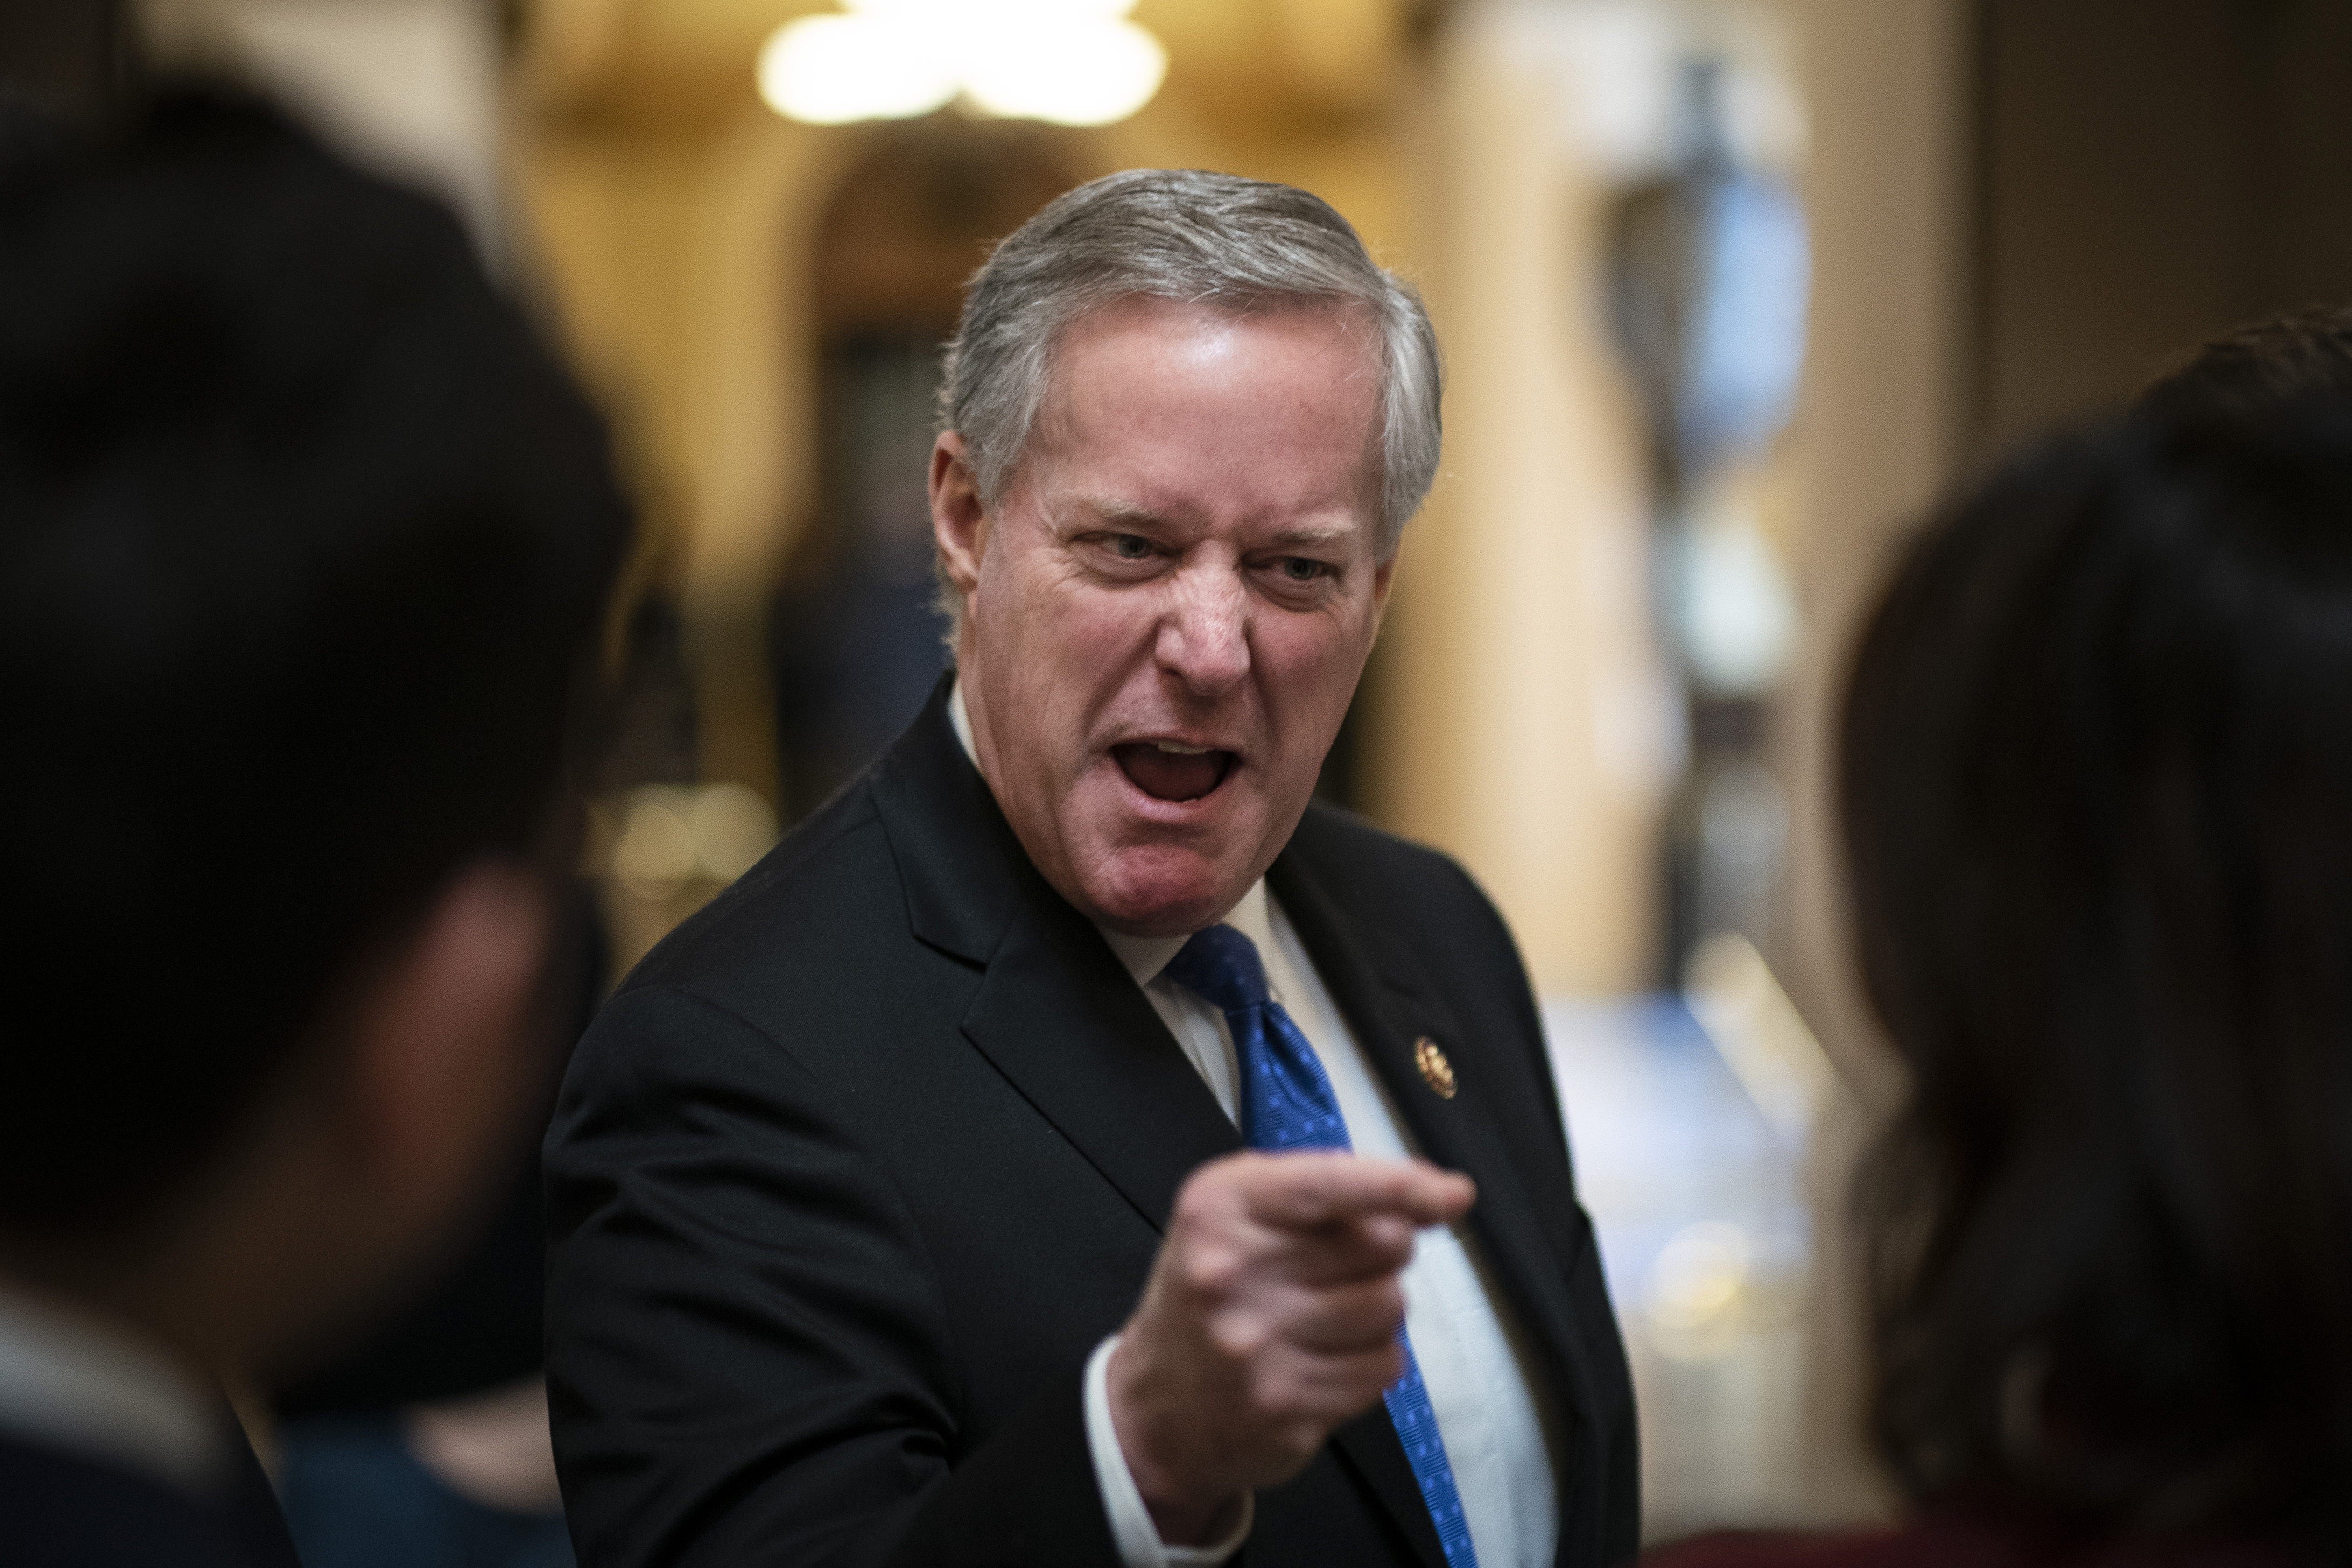 WASHINGTON, DC DECEMBER 18: Rep. Mark Meadows (R-NC) speaks to reporters in Statuary Hall at the U.S. Capitol as debate on the articles of impeachment against President Trump continues on December 18, 2019 in Washington, DC. Later today the U.S. House of Representatives will vote on two articles of impeachment against U.S. President Donald Trump charging him with abuse of power and obstruction of Congress. (Photo by Drew Angerer/Getty Images)